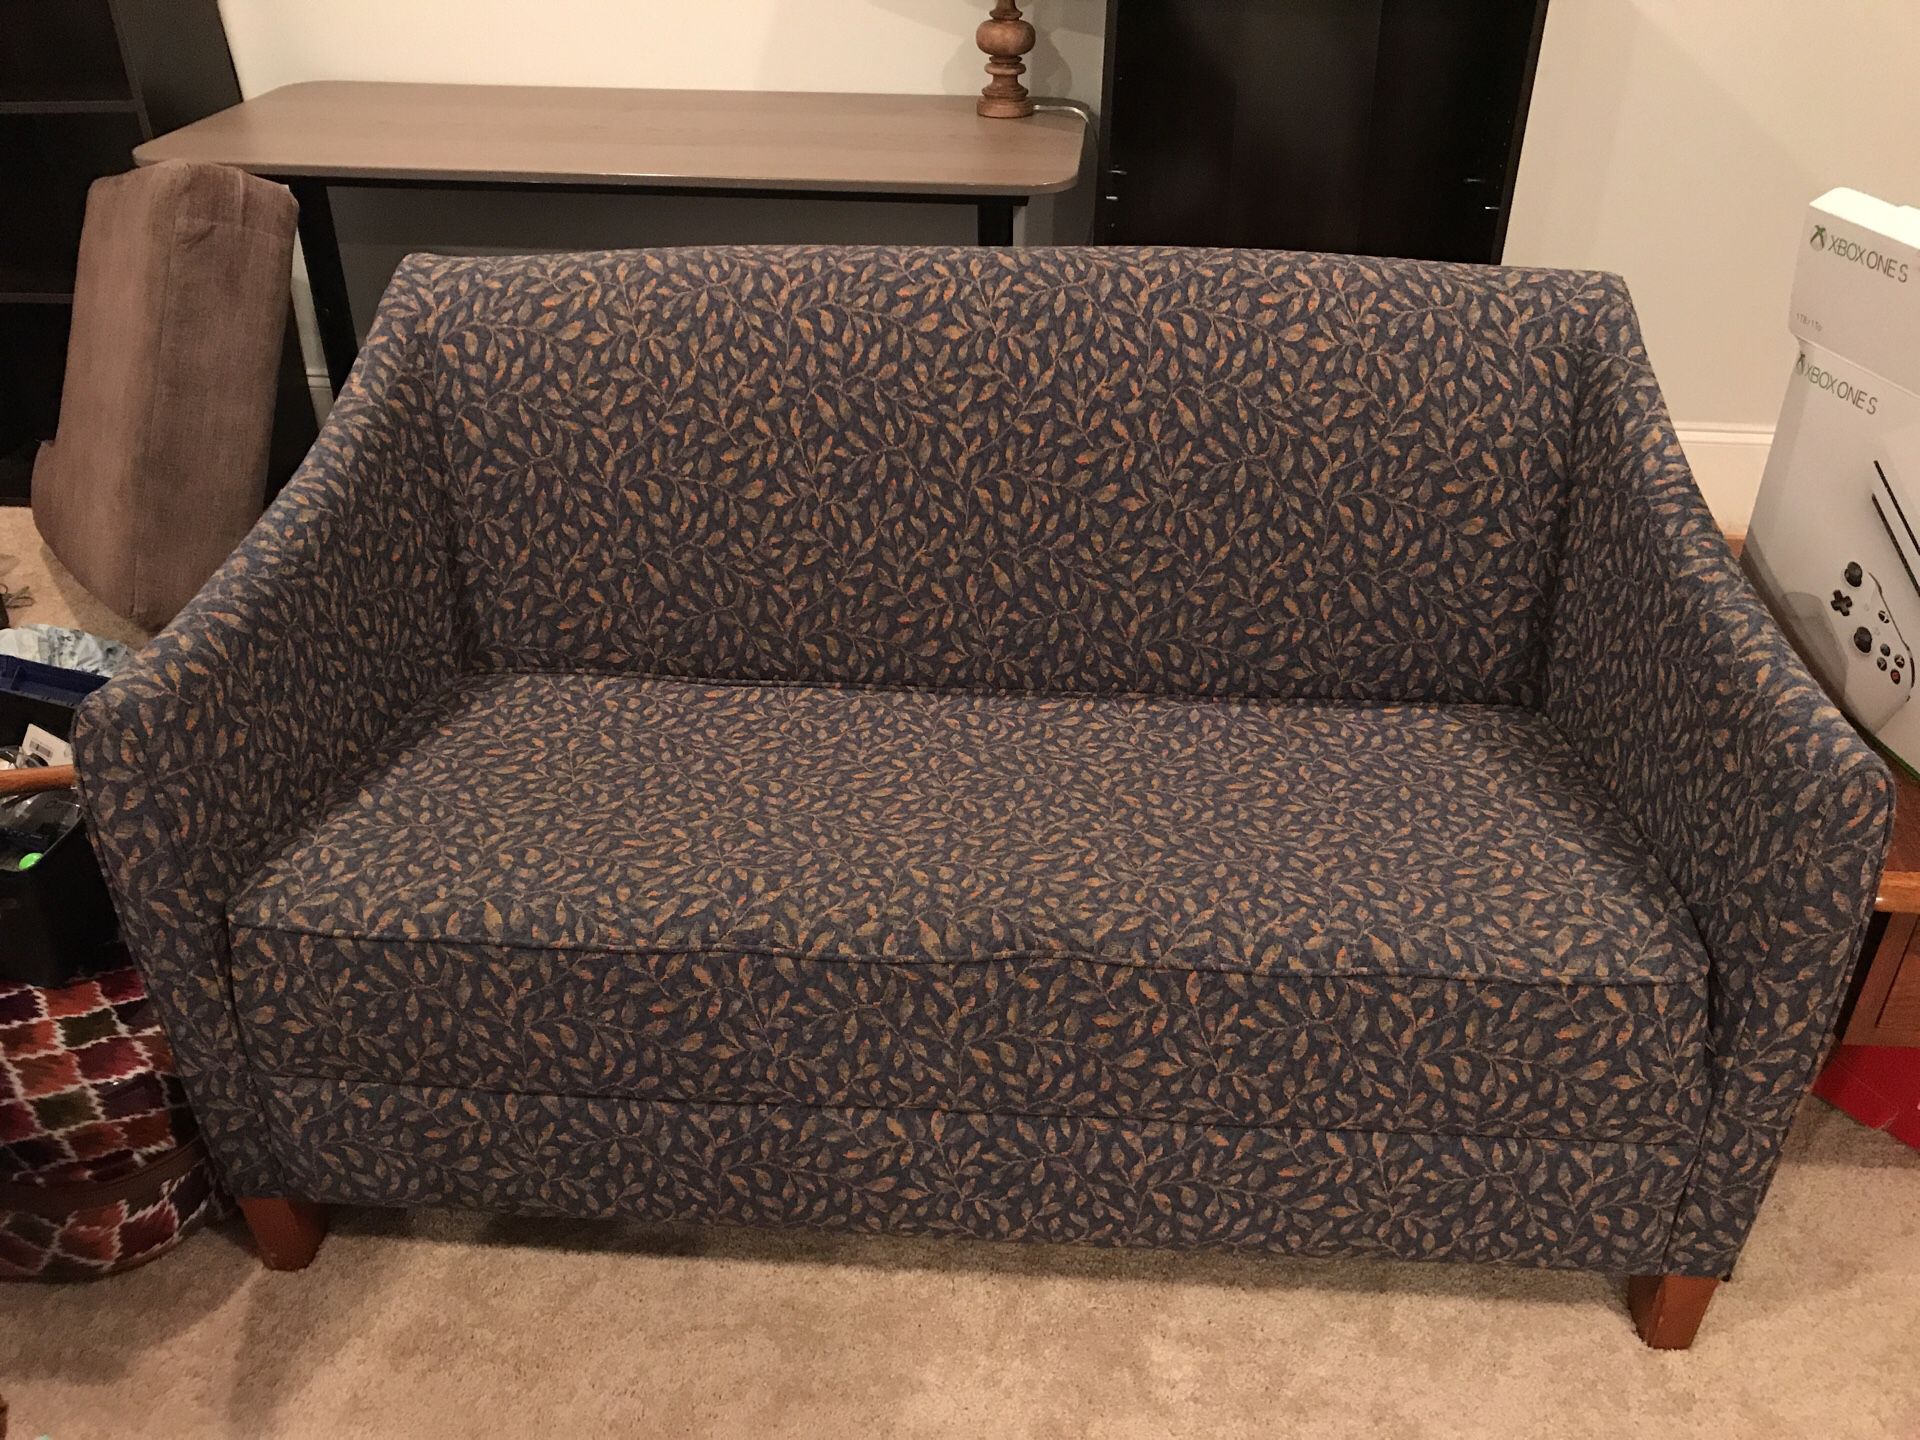 Small vintage style couch